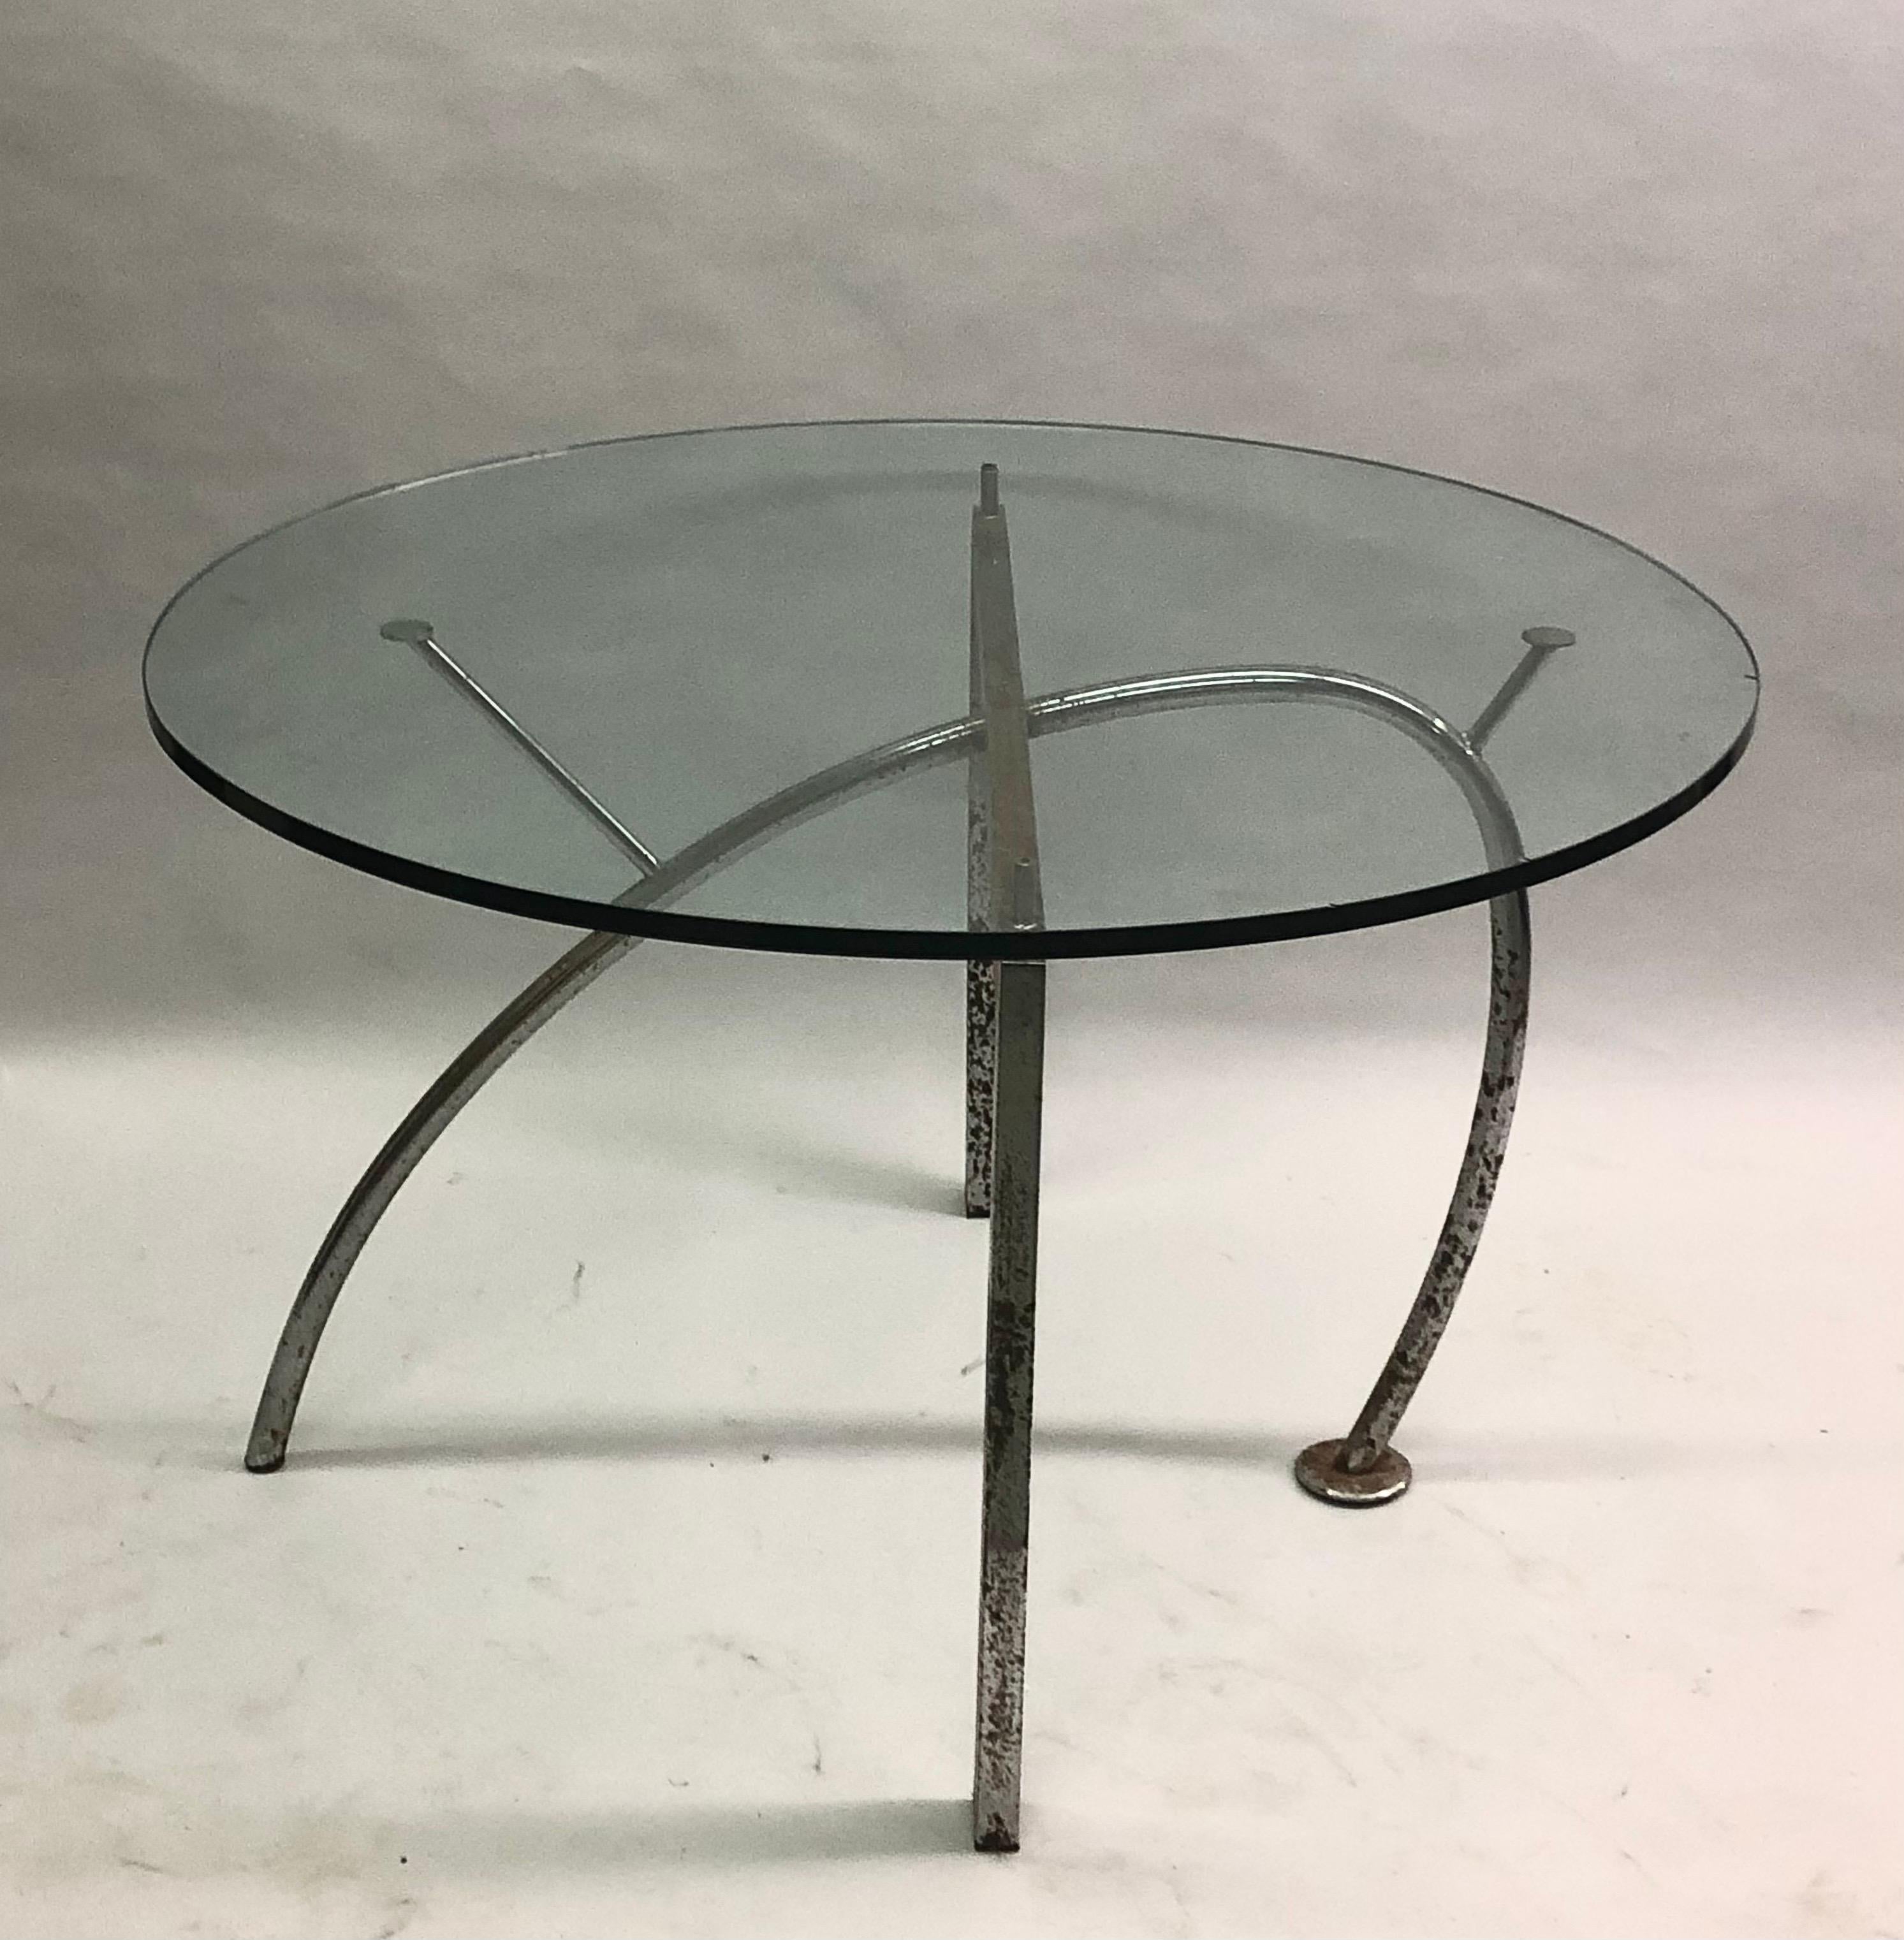 20th Century Italian Post Modern Round Dining Table Prototype by Massimo Iosa Ghini For Sale